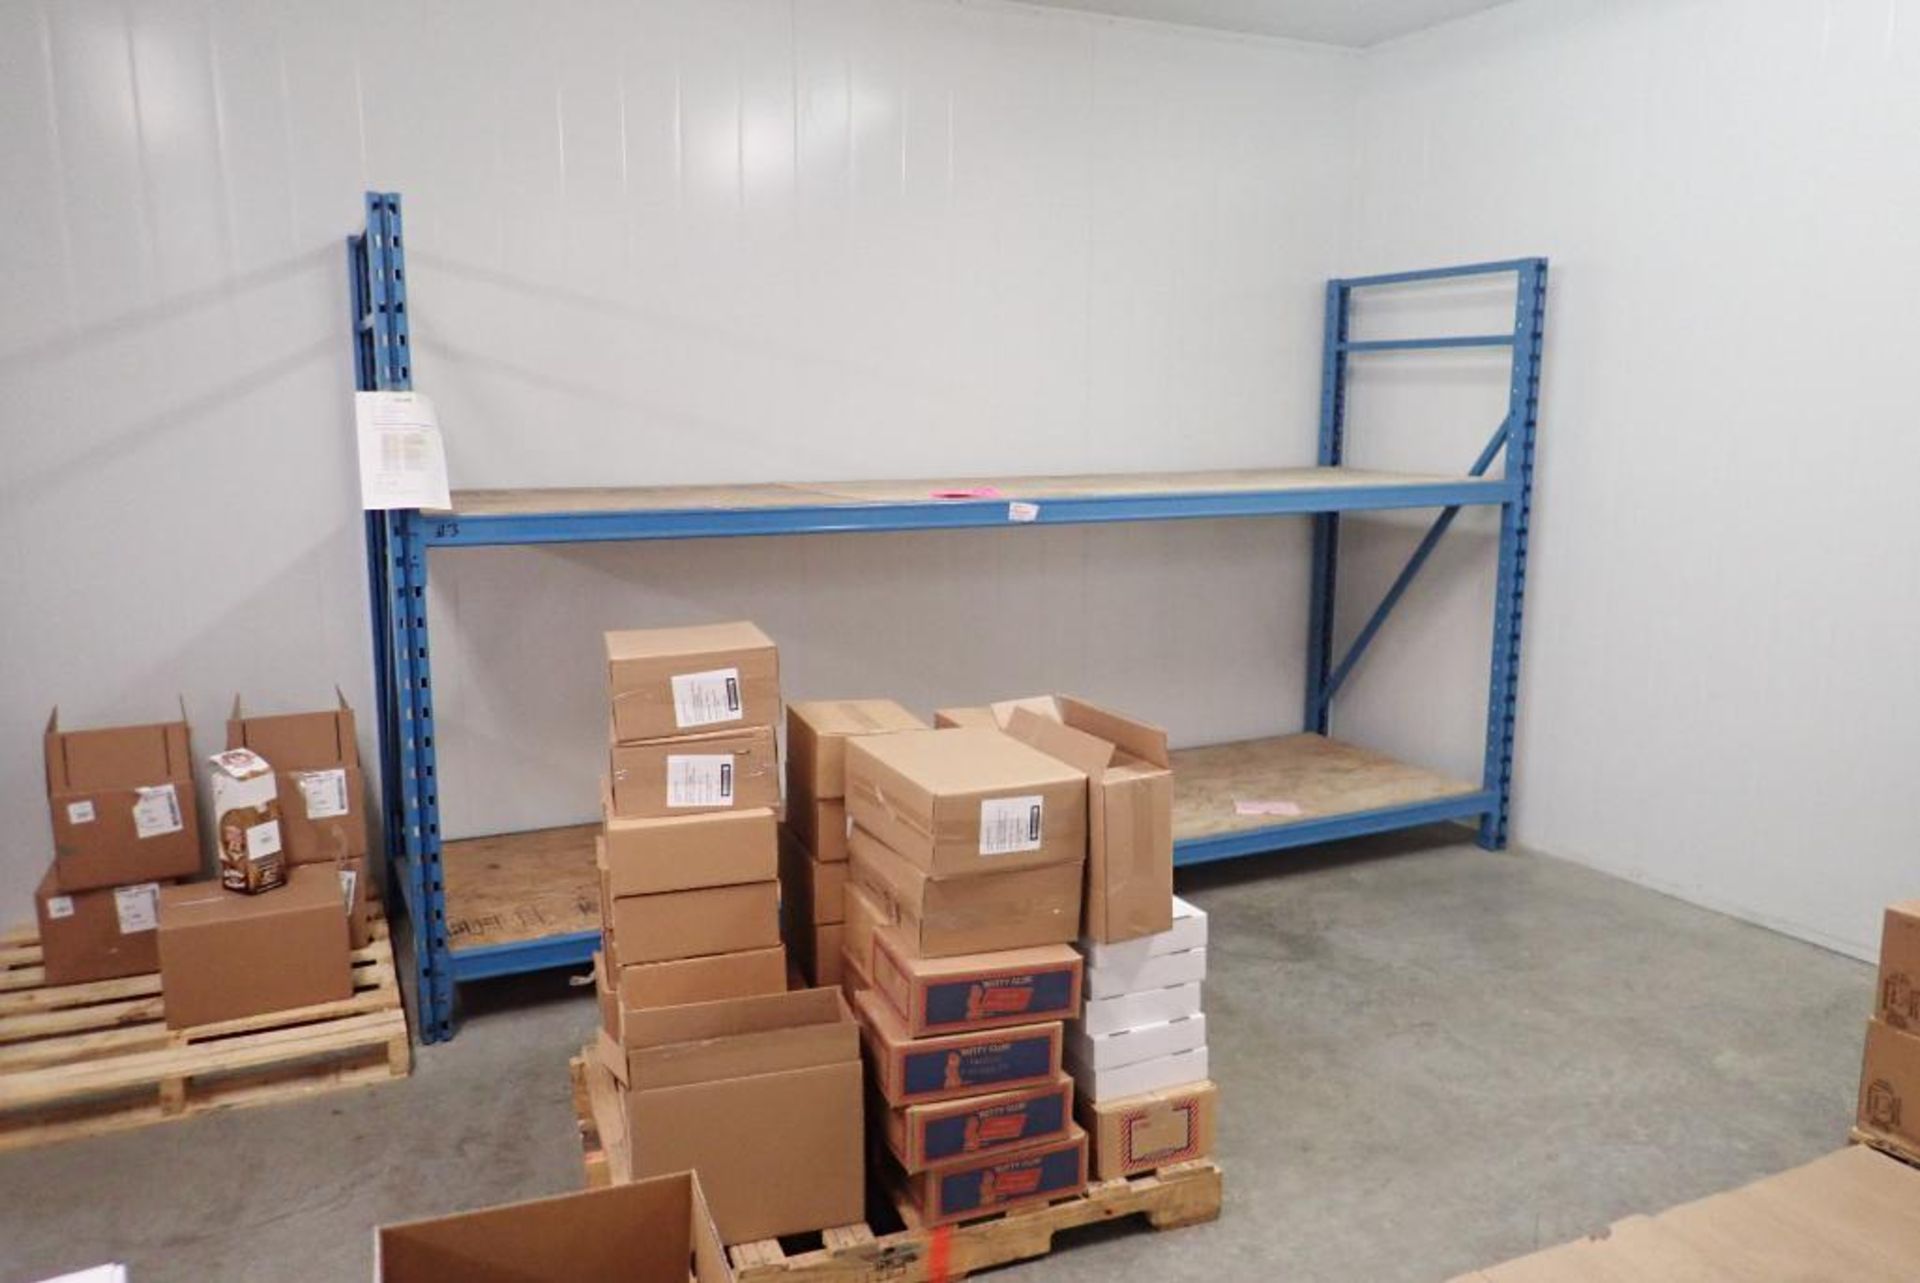 Lot of (3) Sections 11'x32"x8' Pallet Racking and (1) Section 150"x32"x4' Pallet Racking. - Image 2 of 3